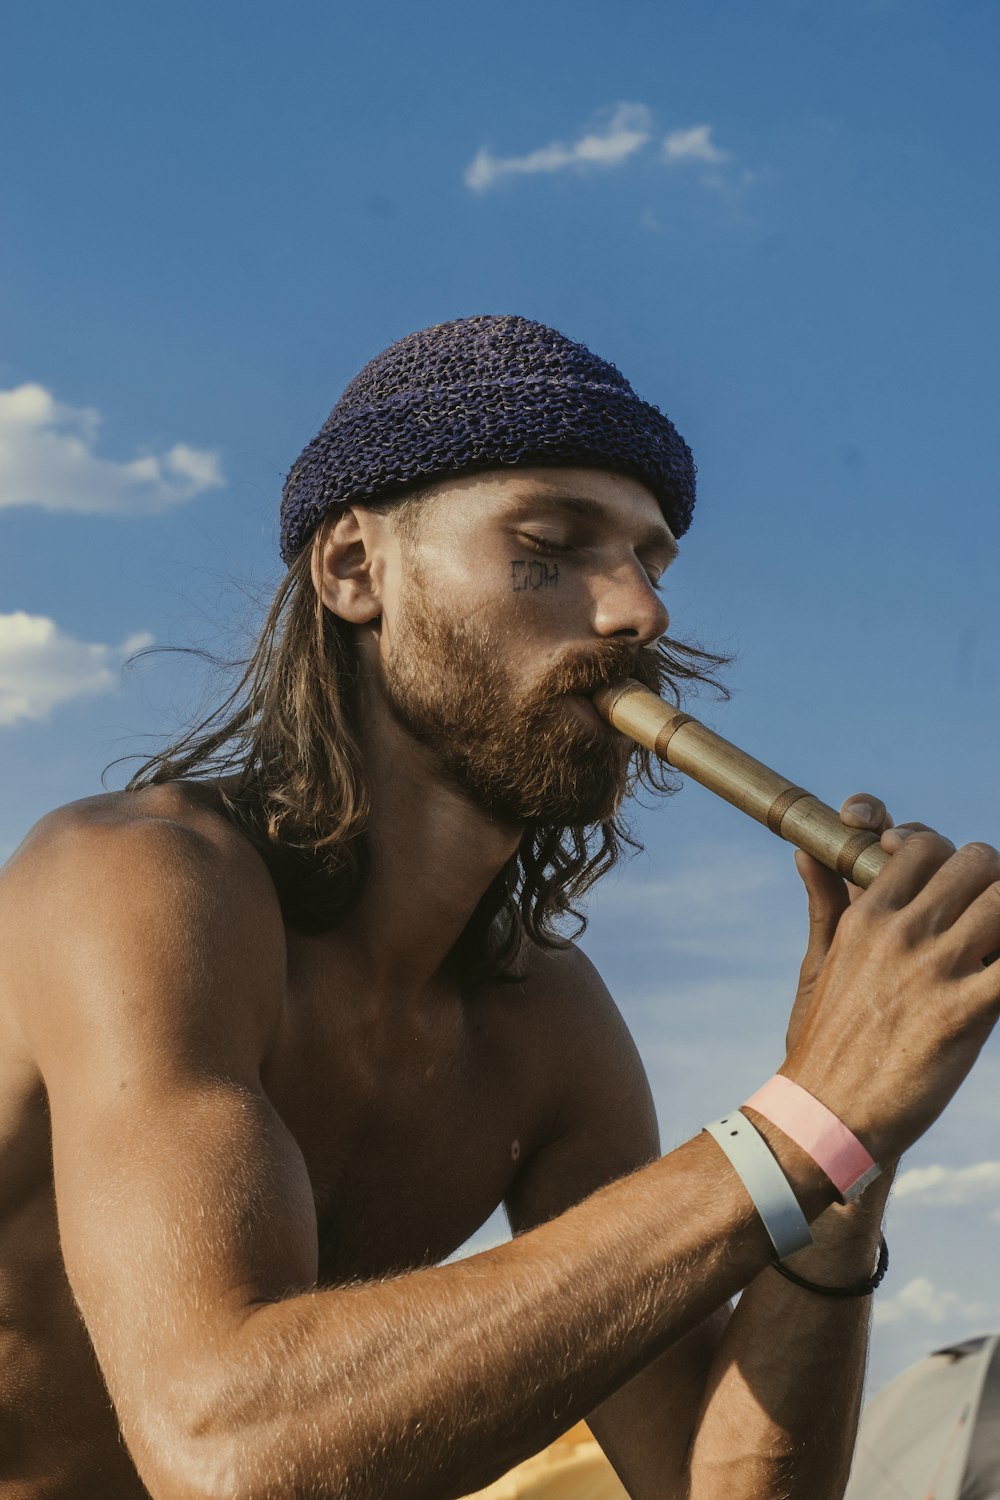 topless man playing flute under blue and white skies during daytime